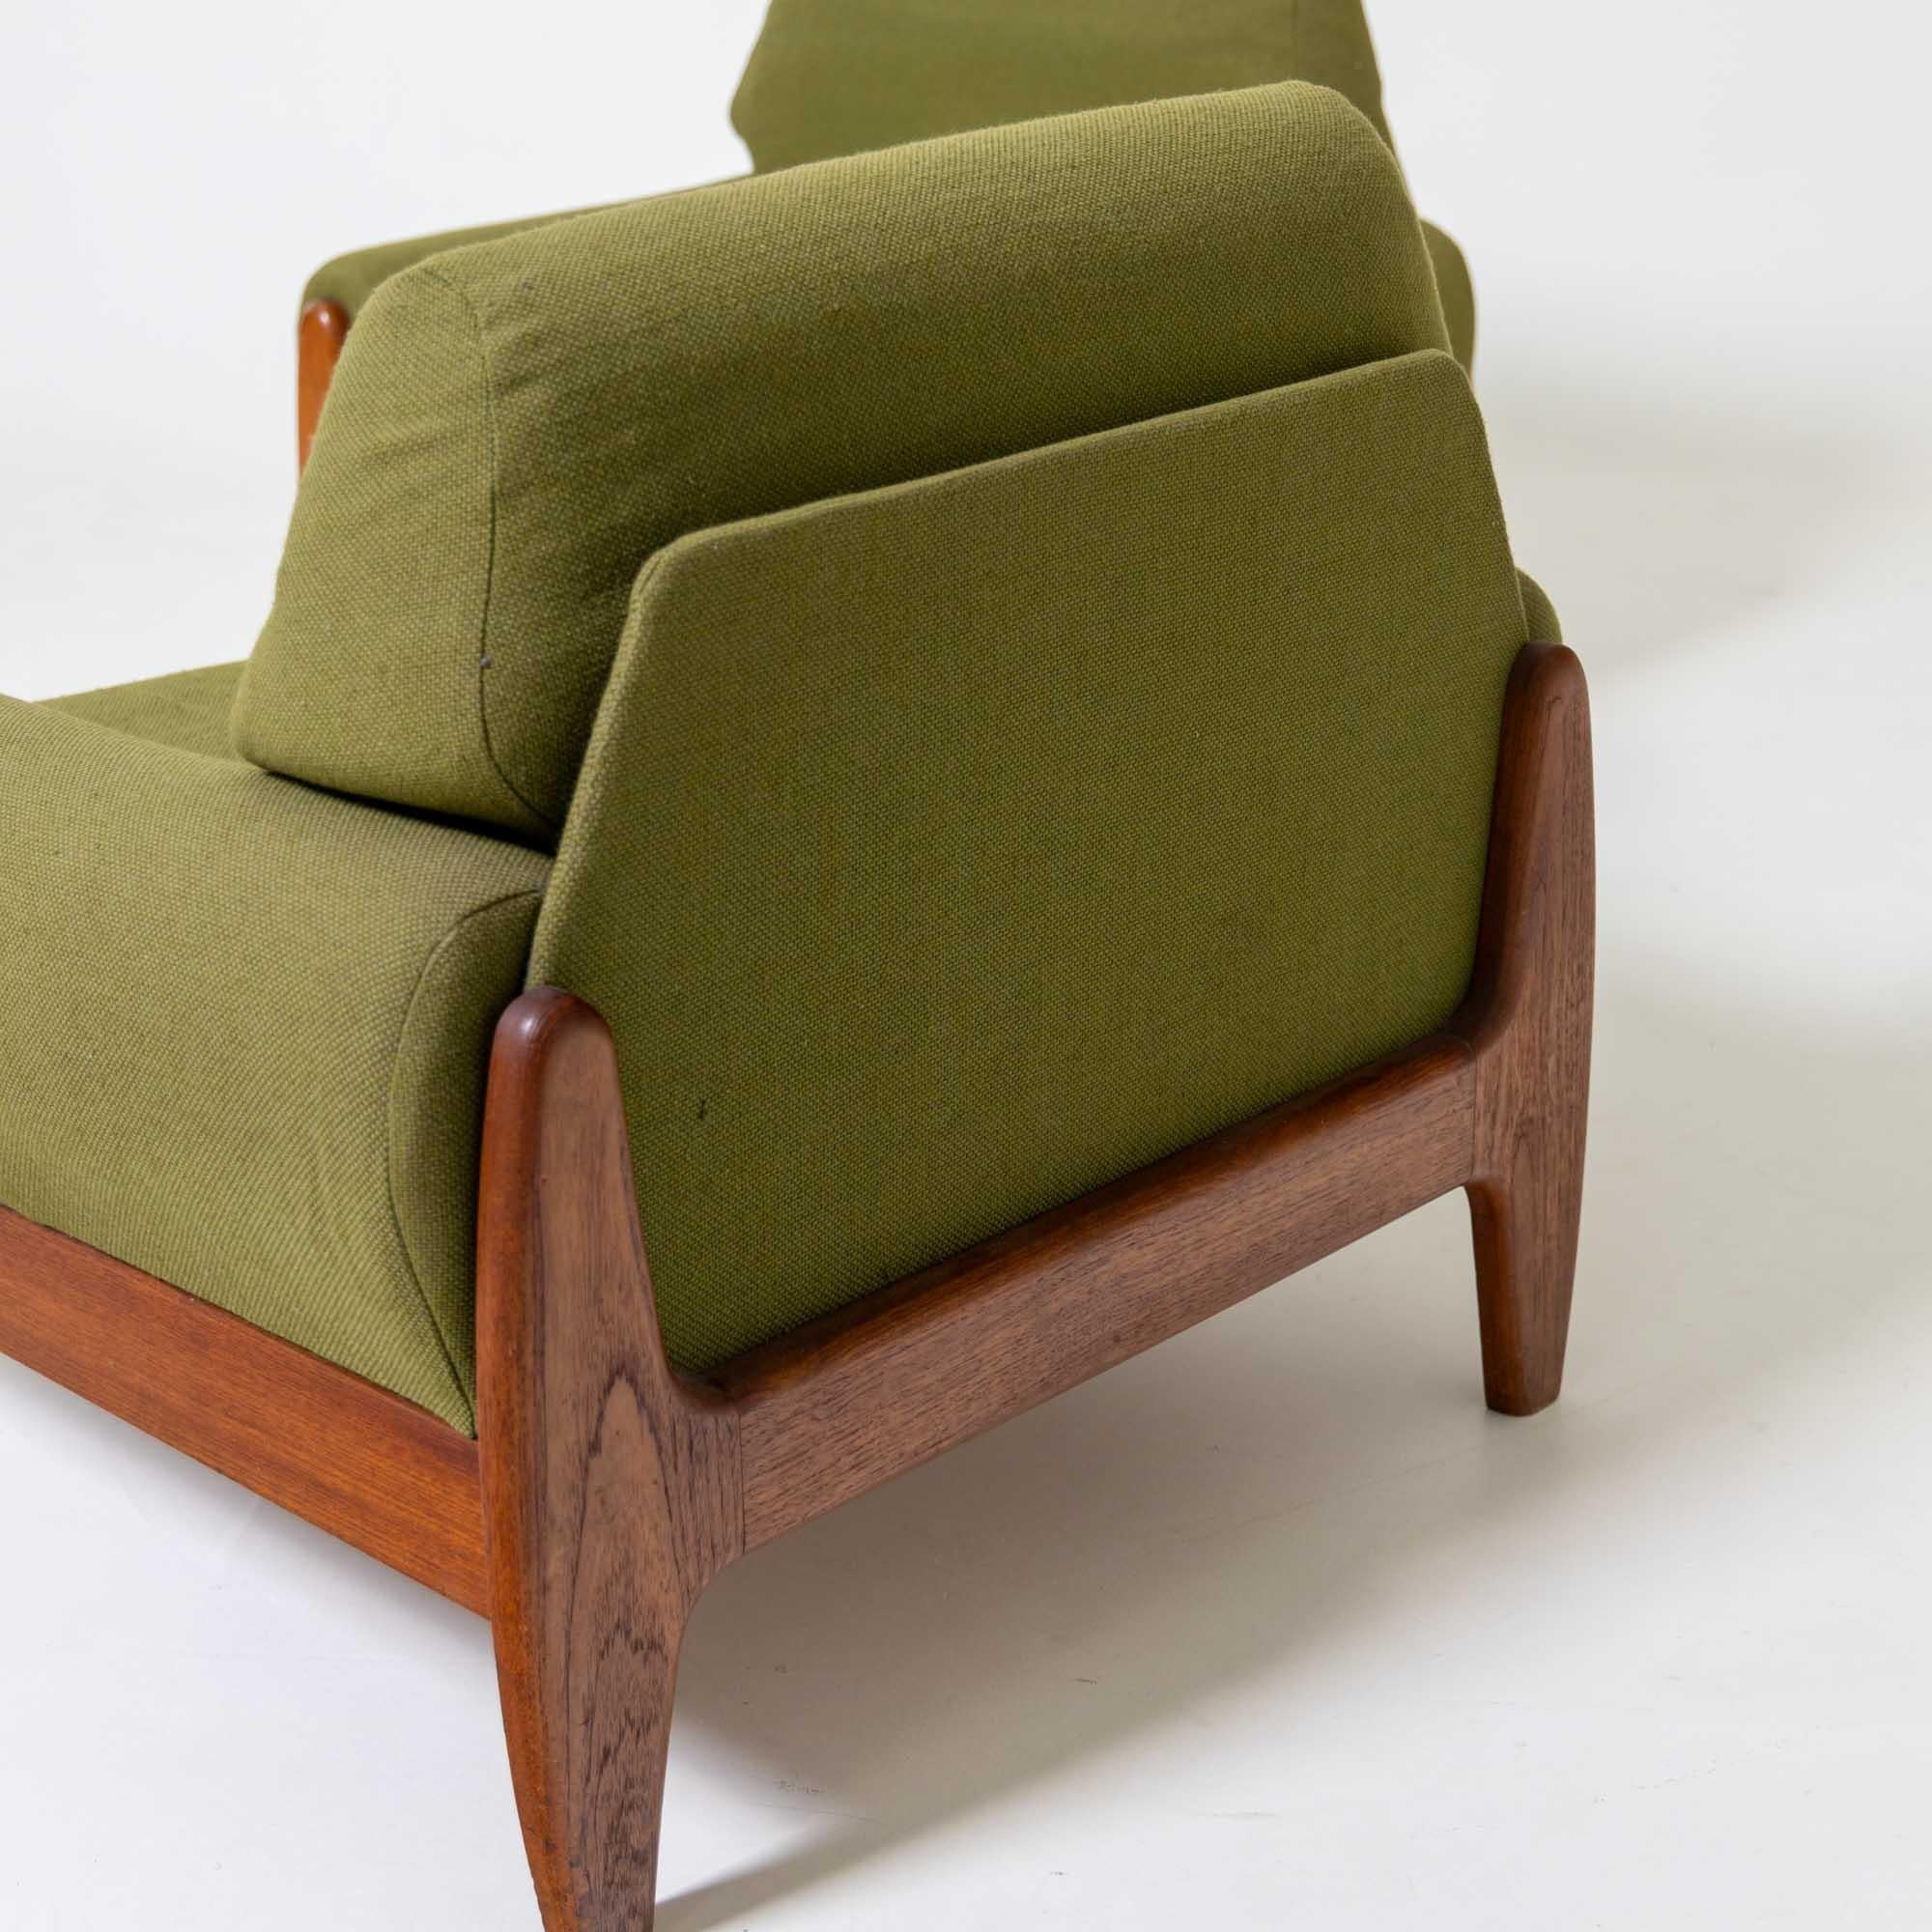 Pair of Armchairs with Green Upholstery, by Illum Denmark, Mid-20th Century For Sale 1